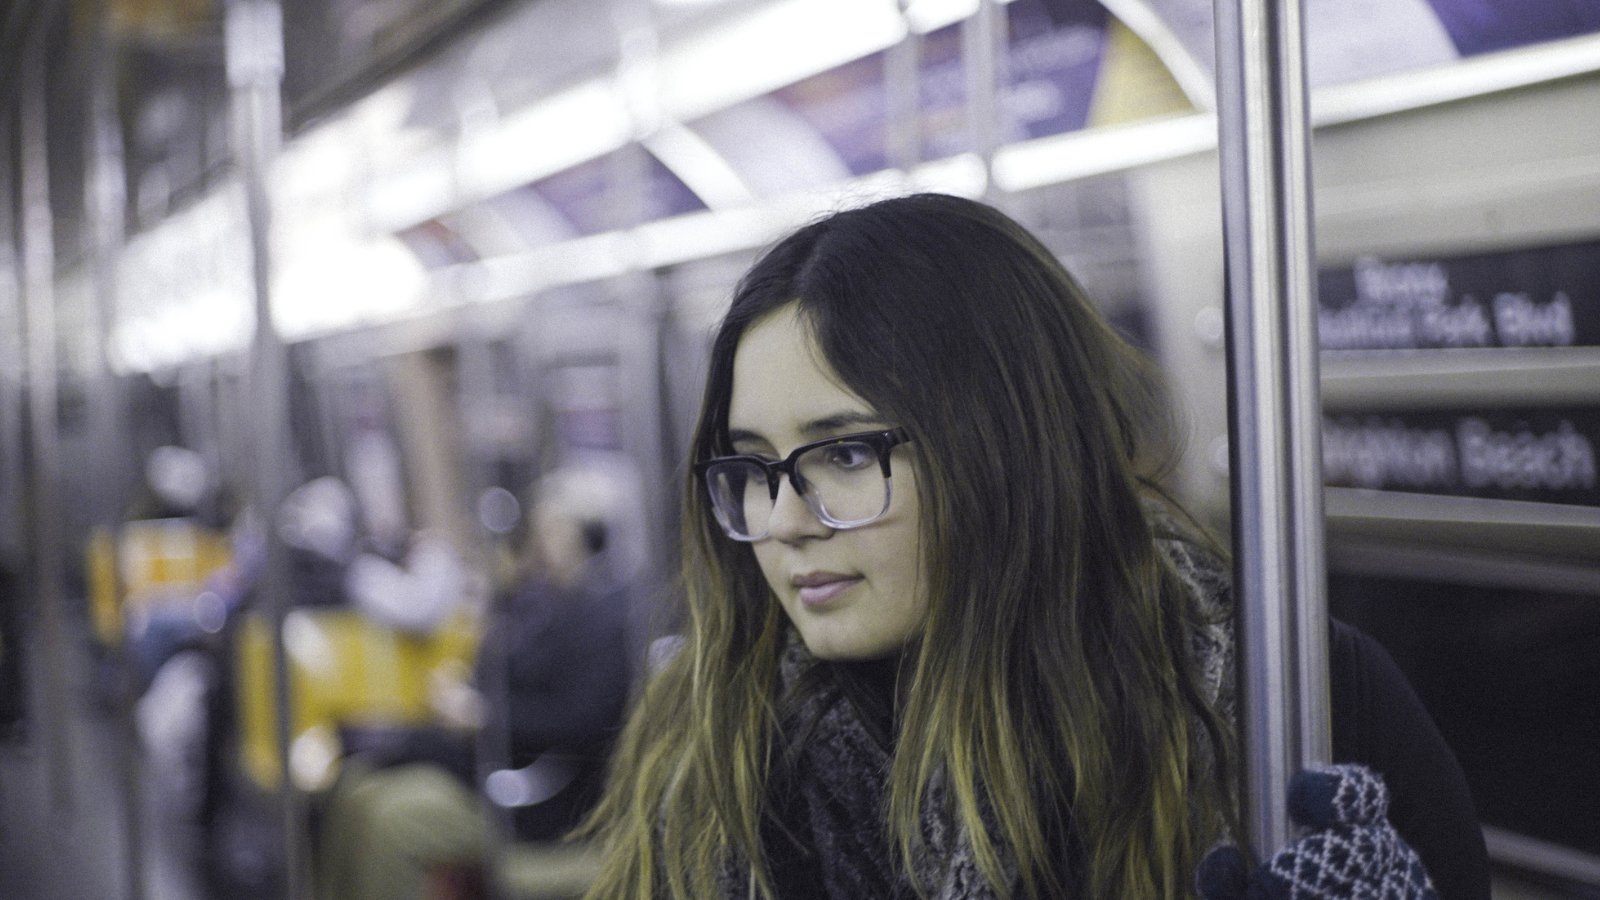 A woman on the subway.